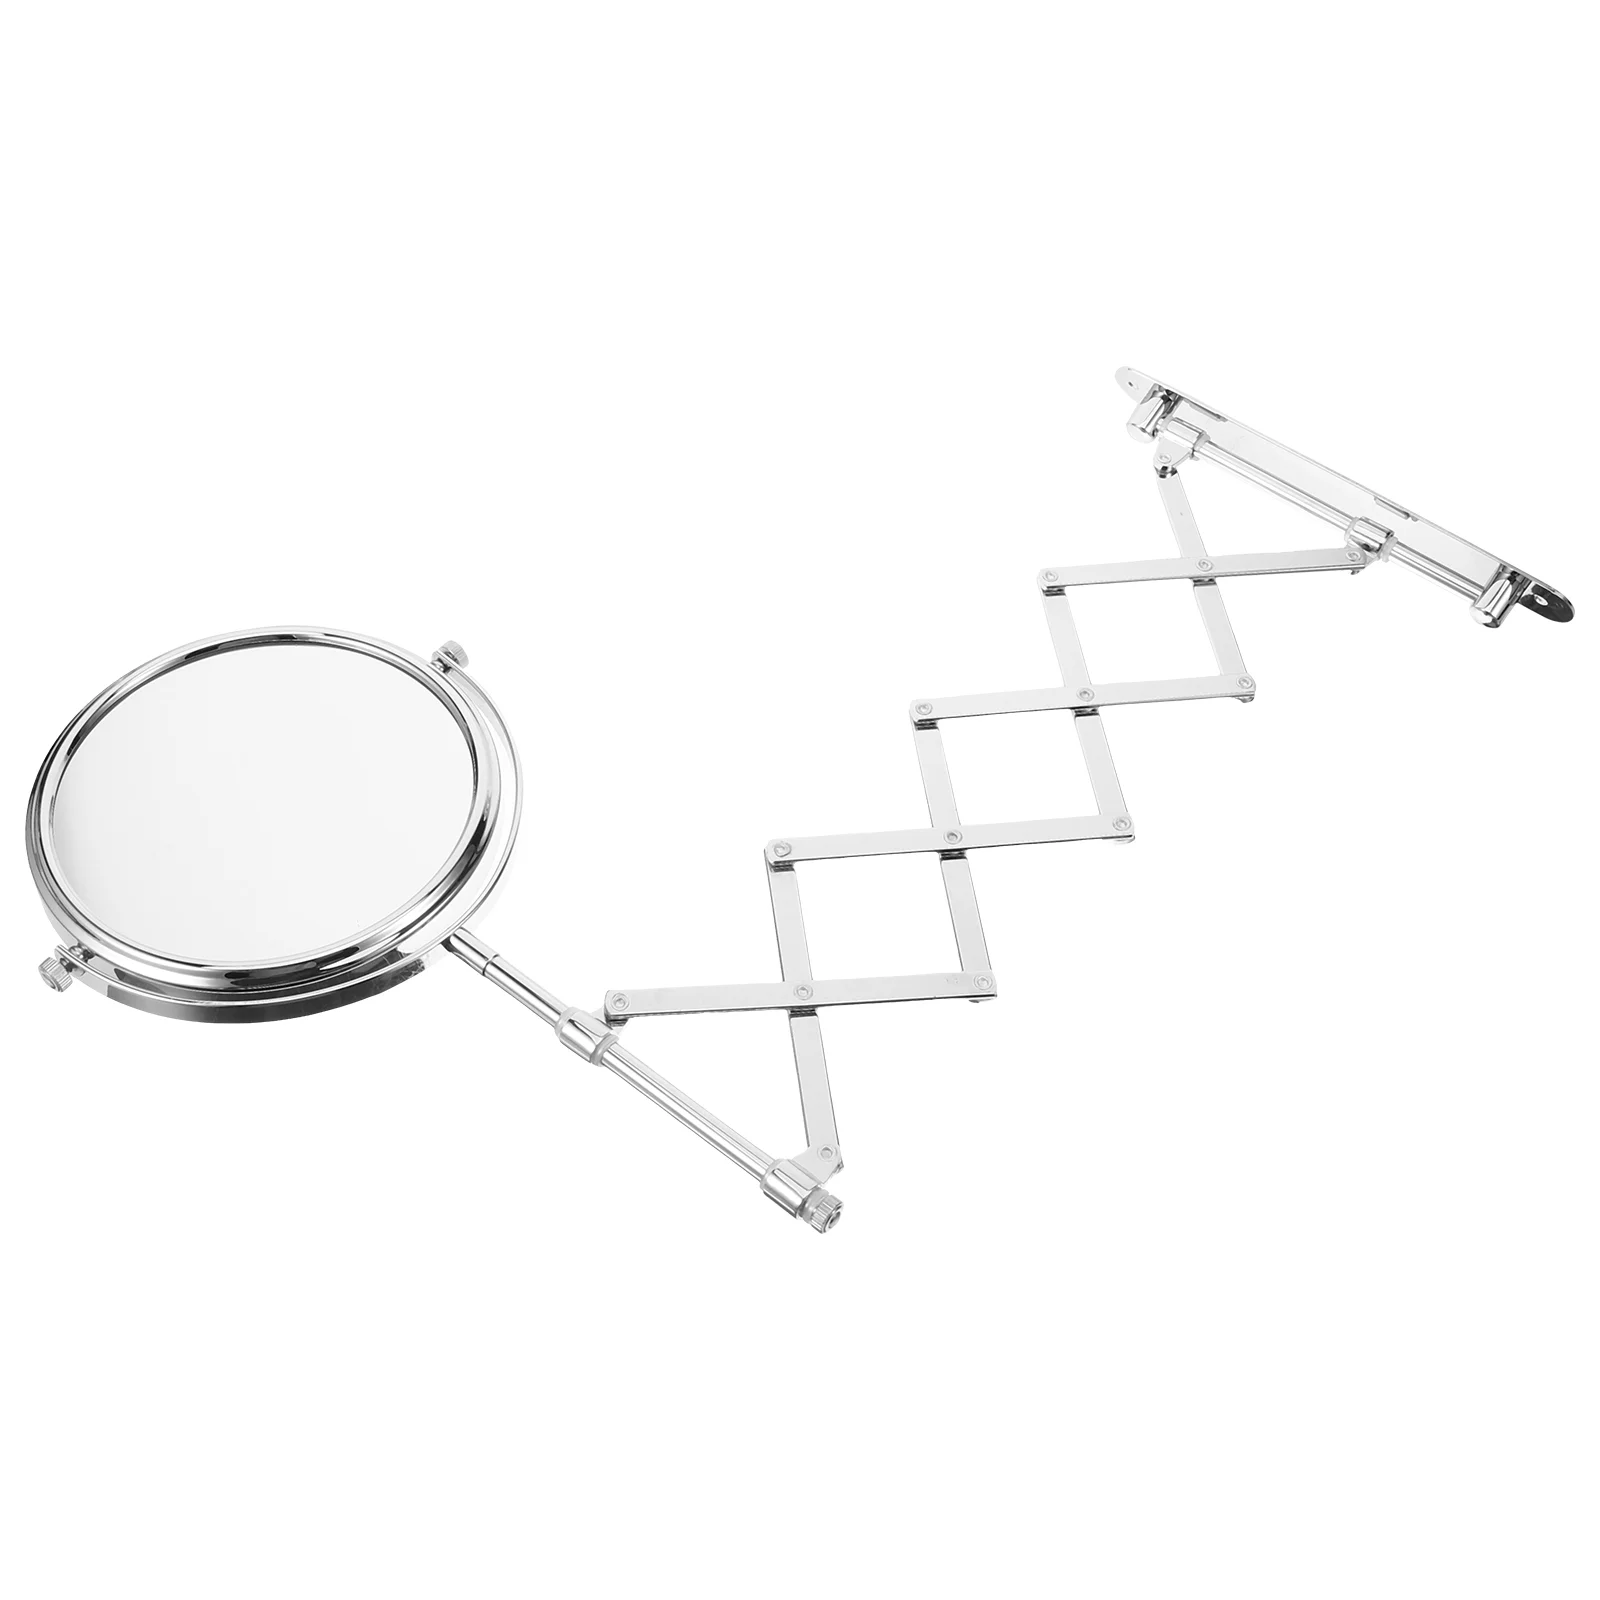 Inch 3X Magnifying Round Mirrors Two-Sided Retractable Bathroom Mirror Degree Swivel Makeup Mirror inch 3x magnifying round mirrors two sided retractable bathroom mirror degree swivel makeup mirror